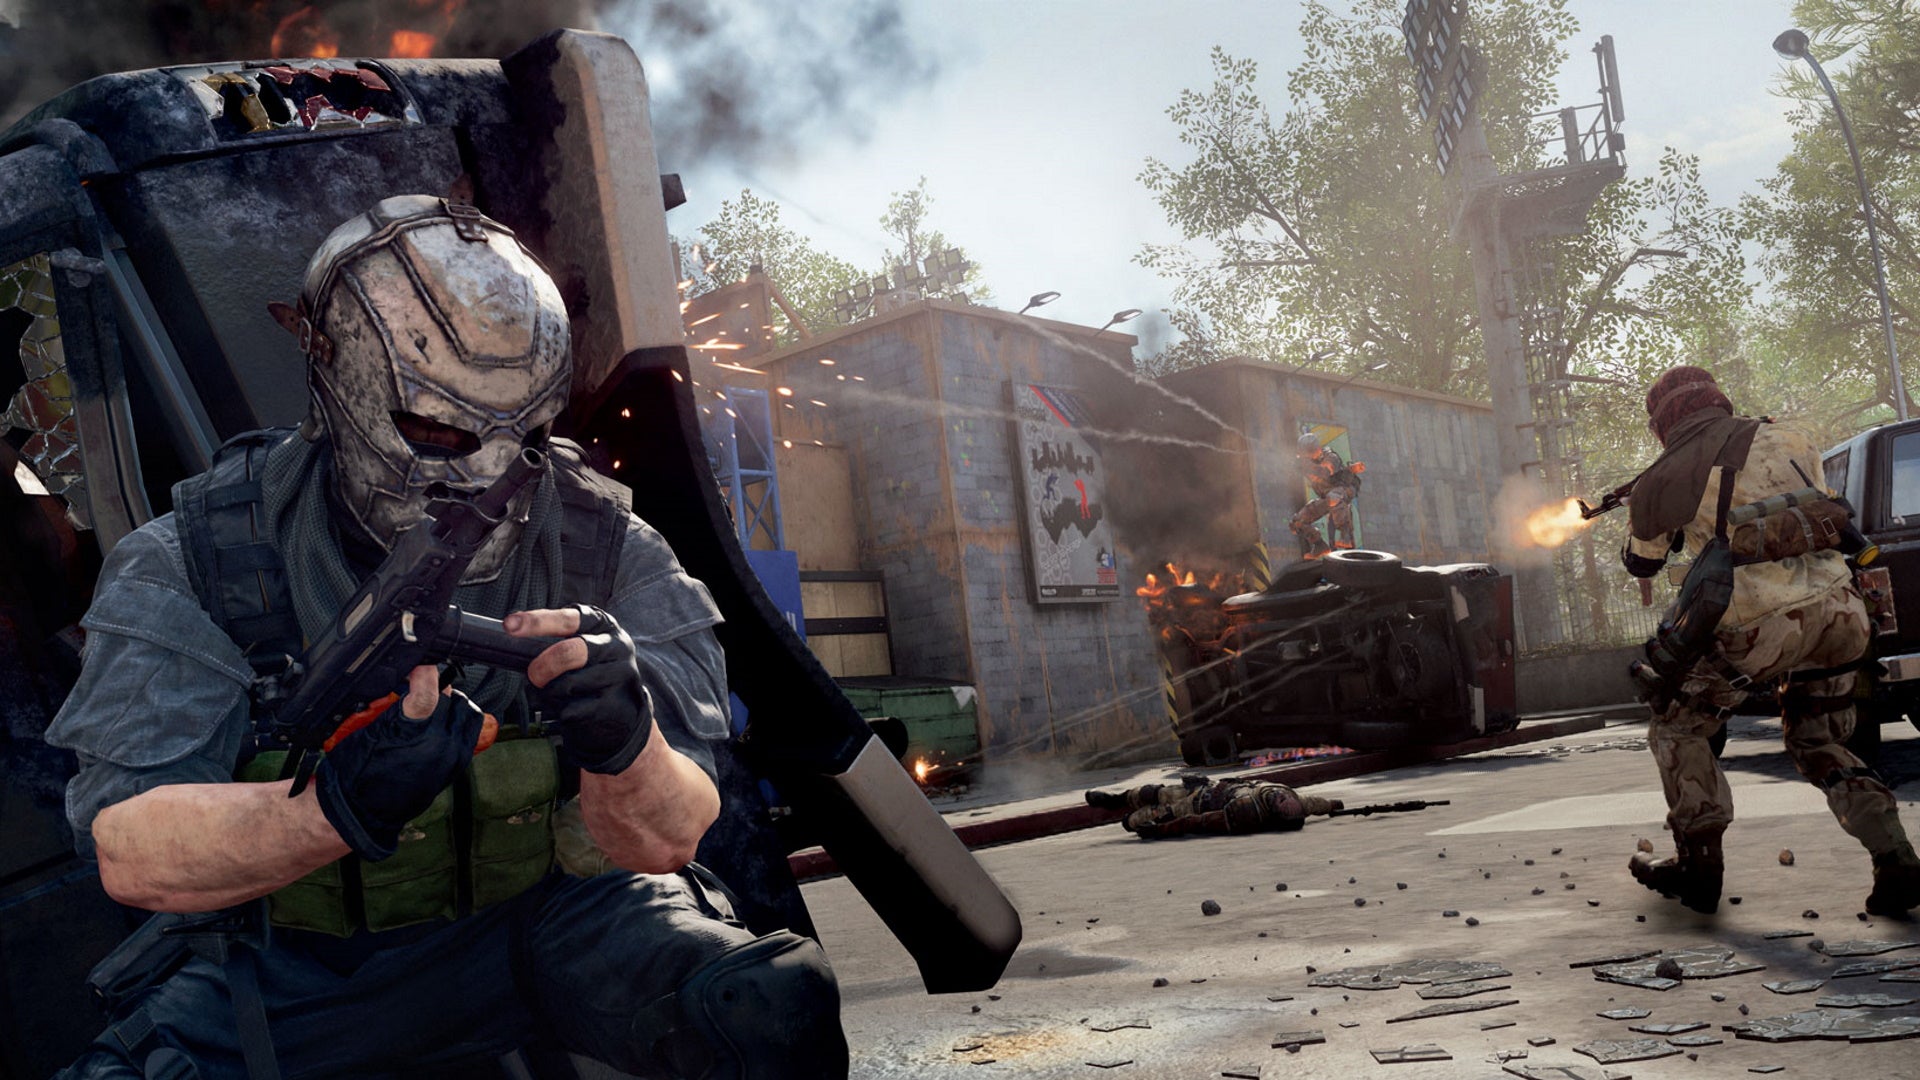 An image from Call Of Duty: Warzone and Black Ops Cold War's Season 4 Reloaded update, which shows a masked operator ducking for cover behind an overturned vehicle as a firefight breaks out.